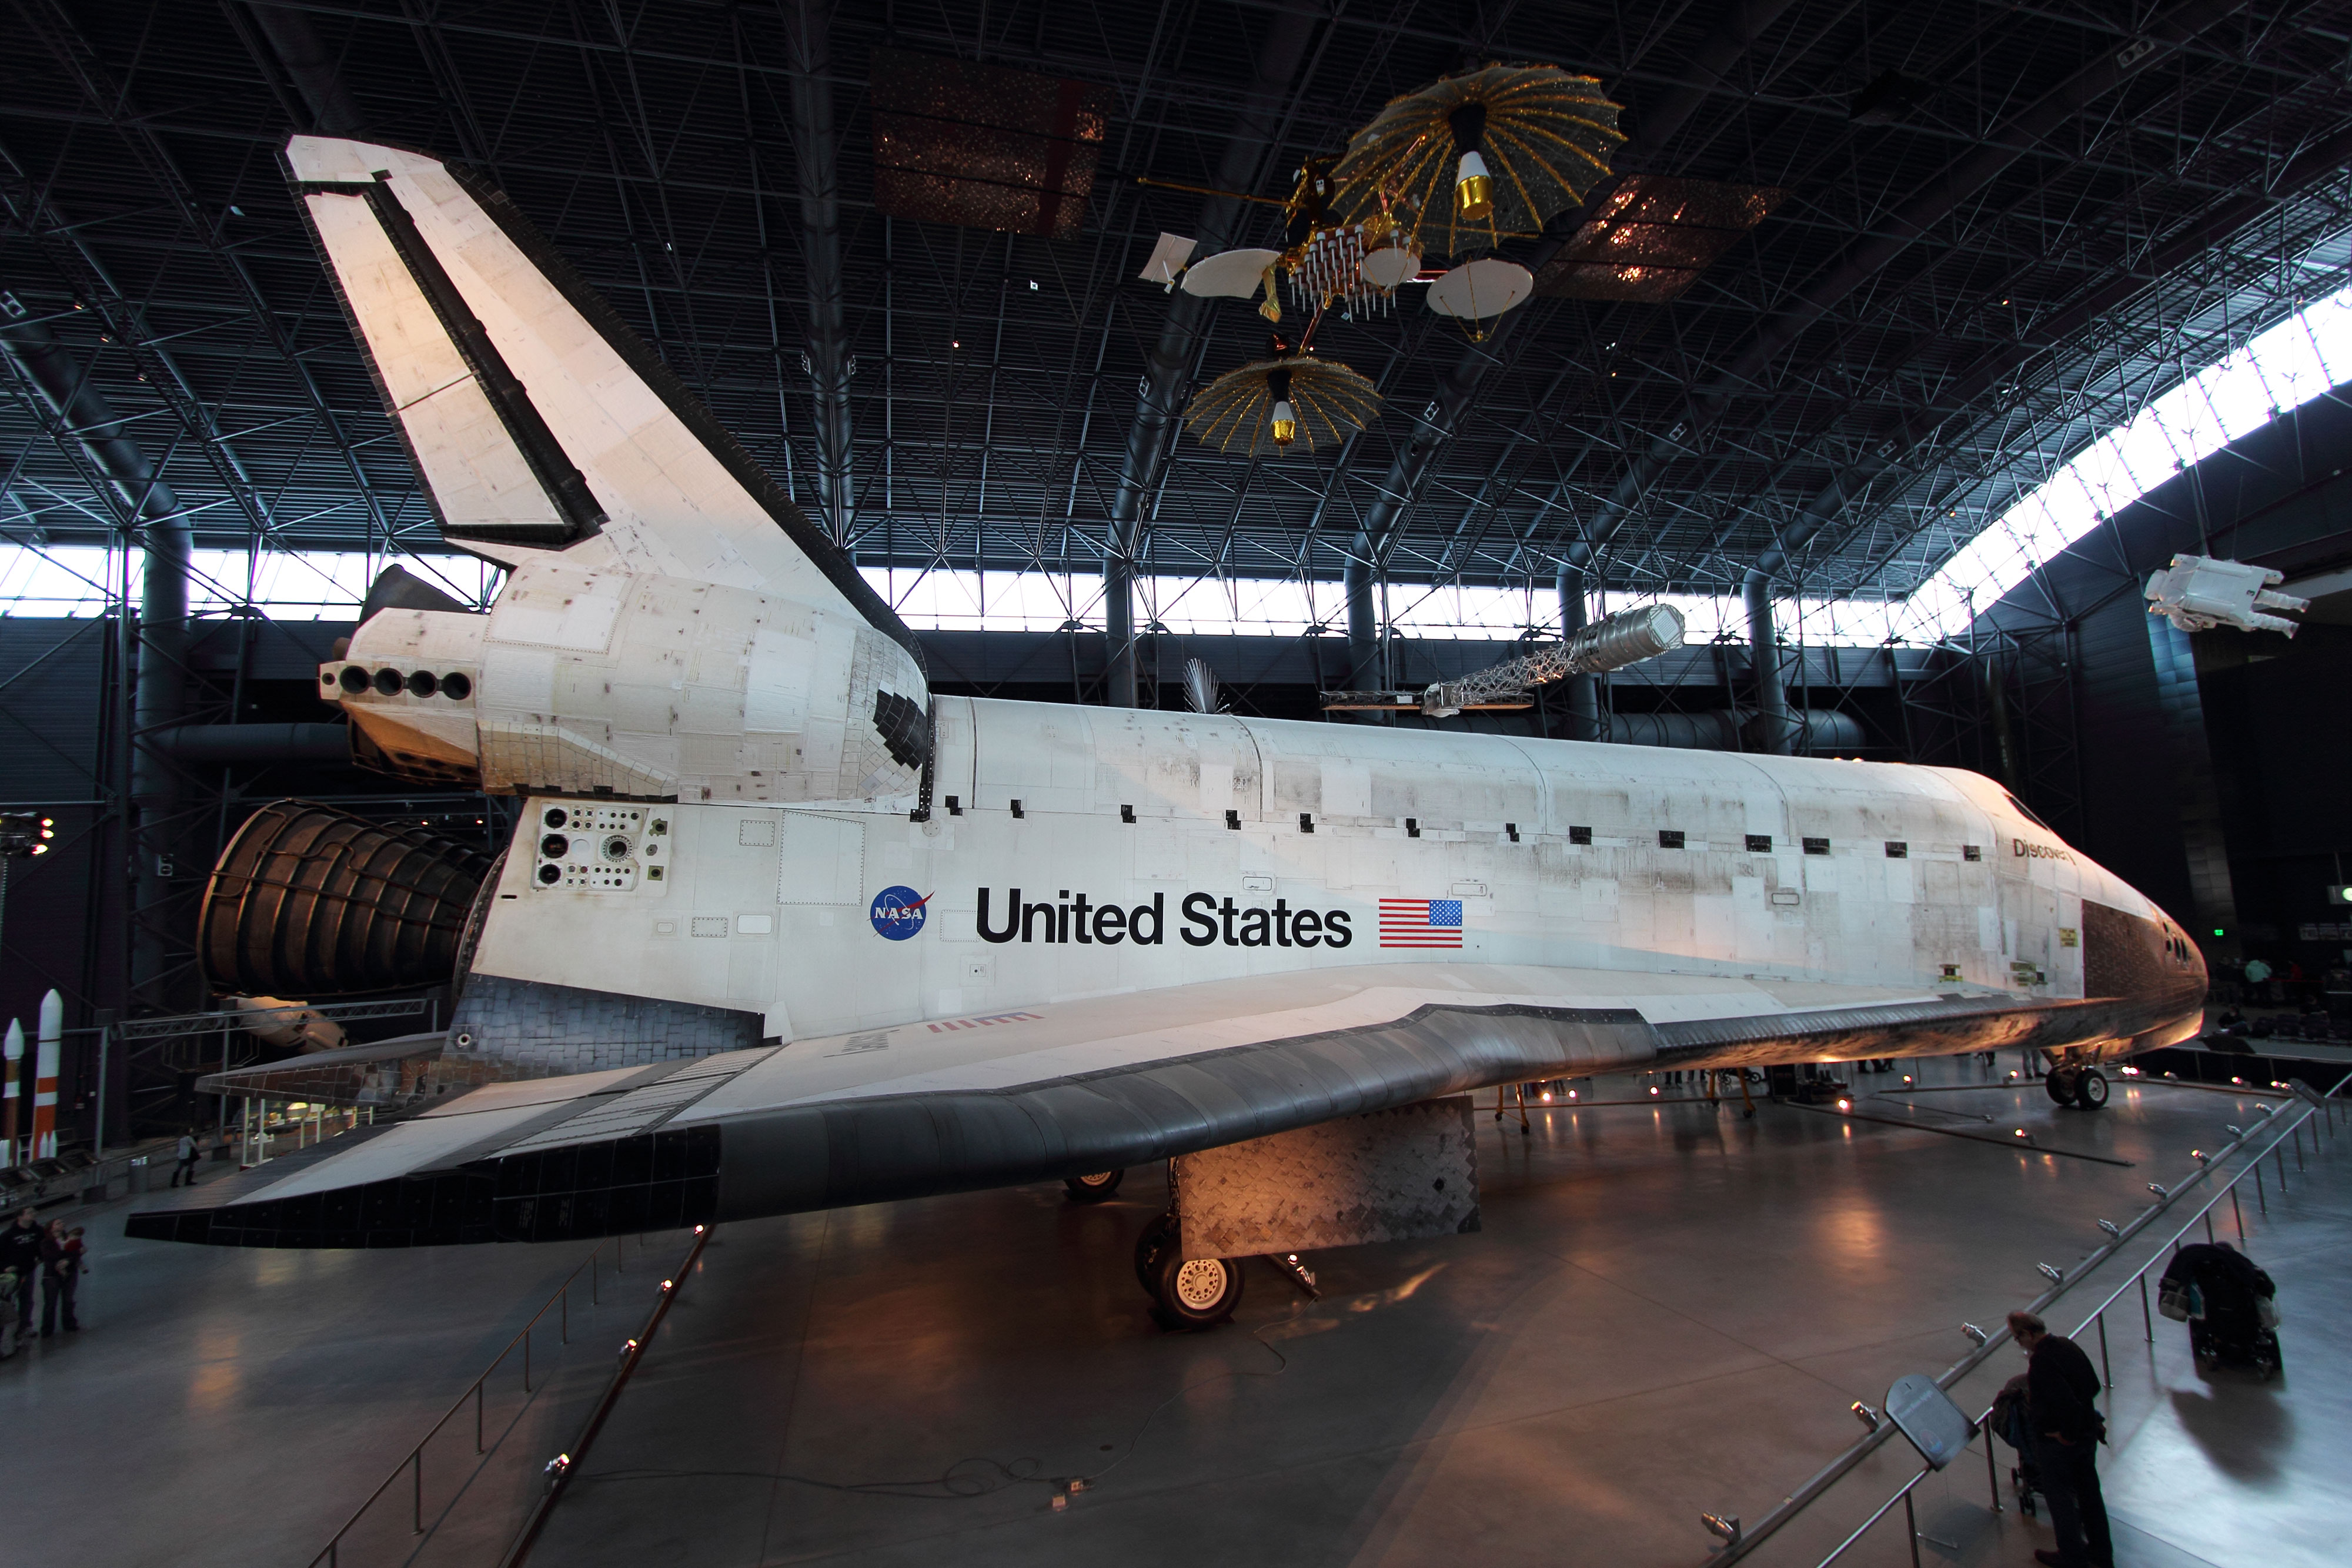 space shuttle discovery